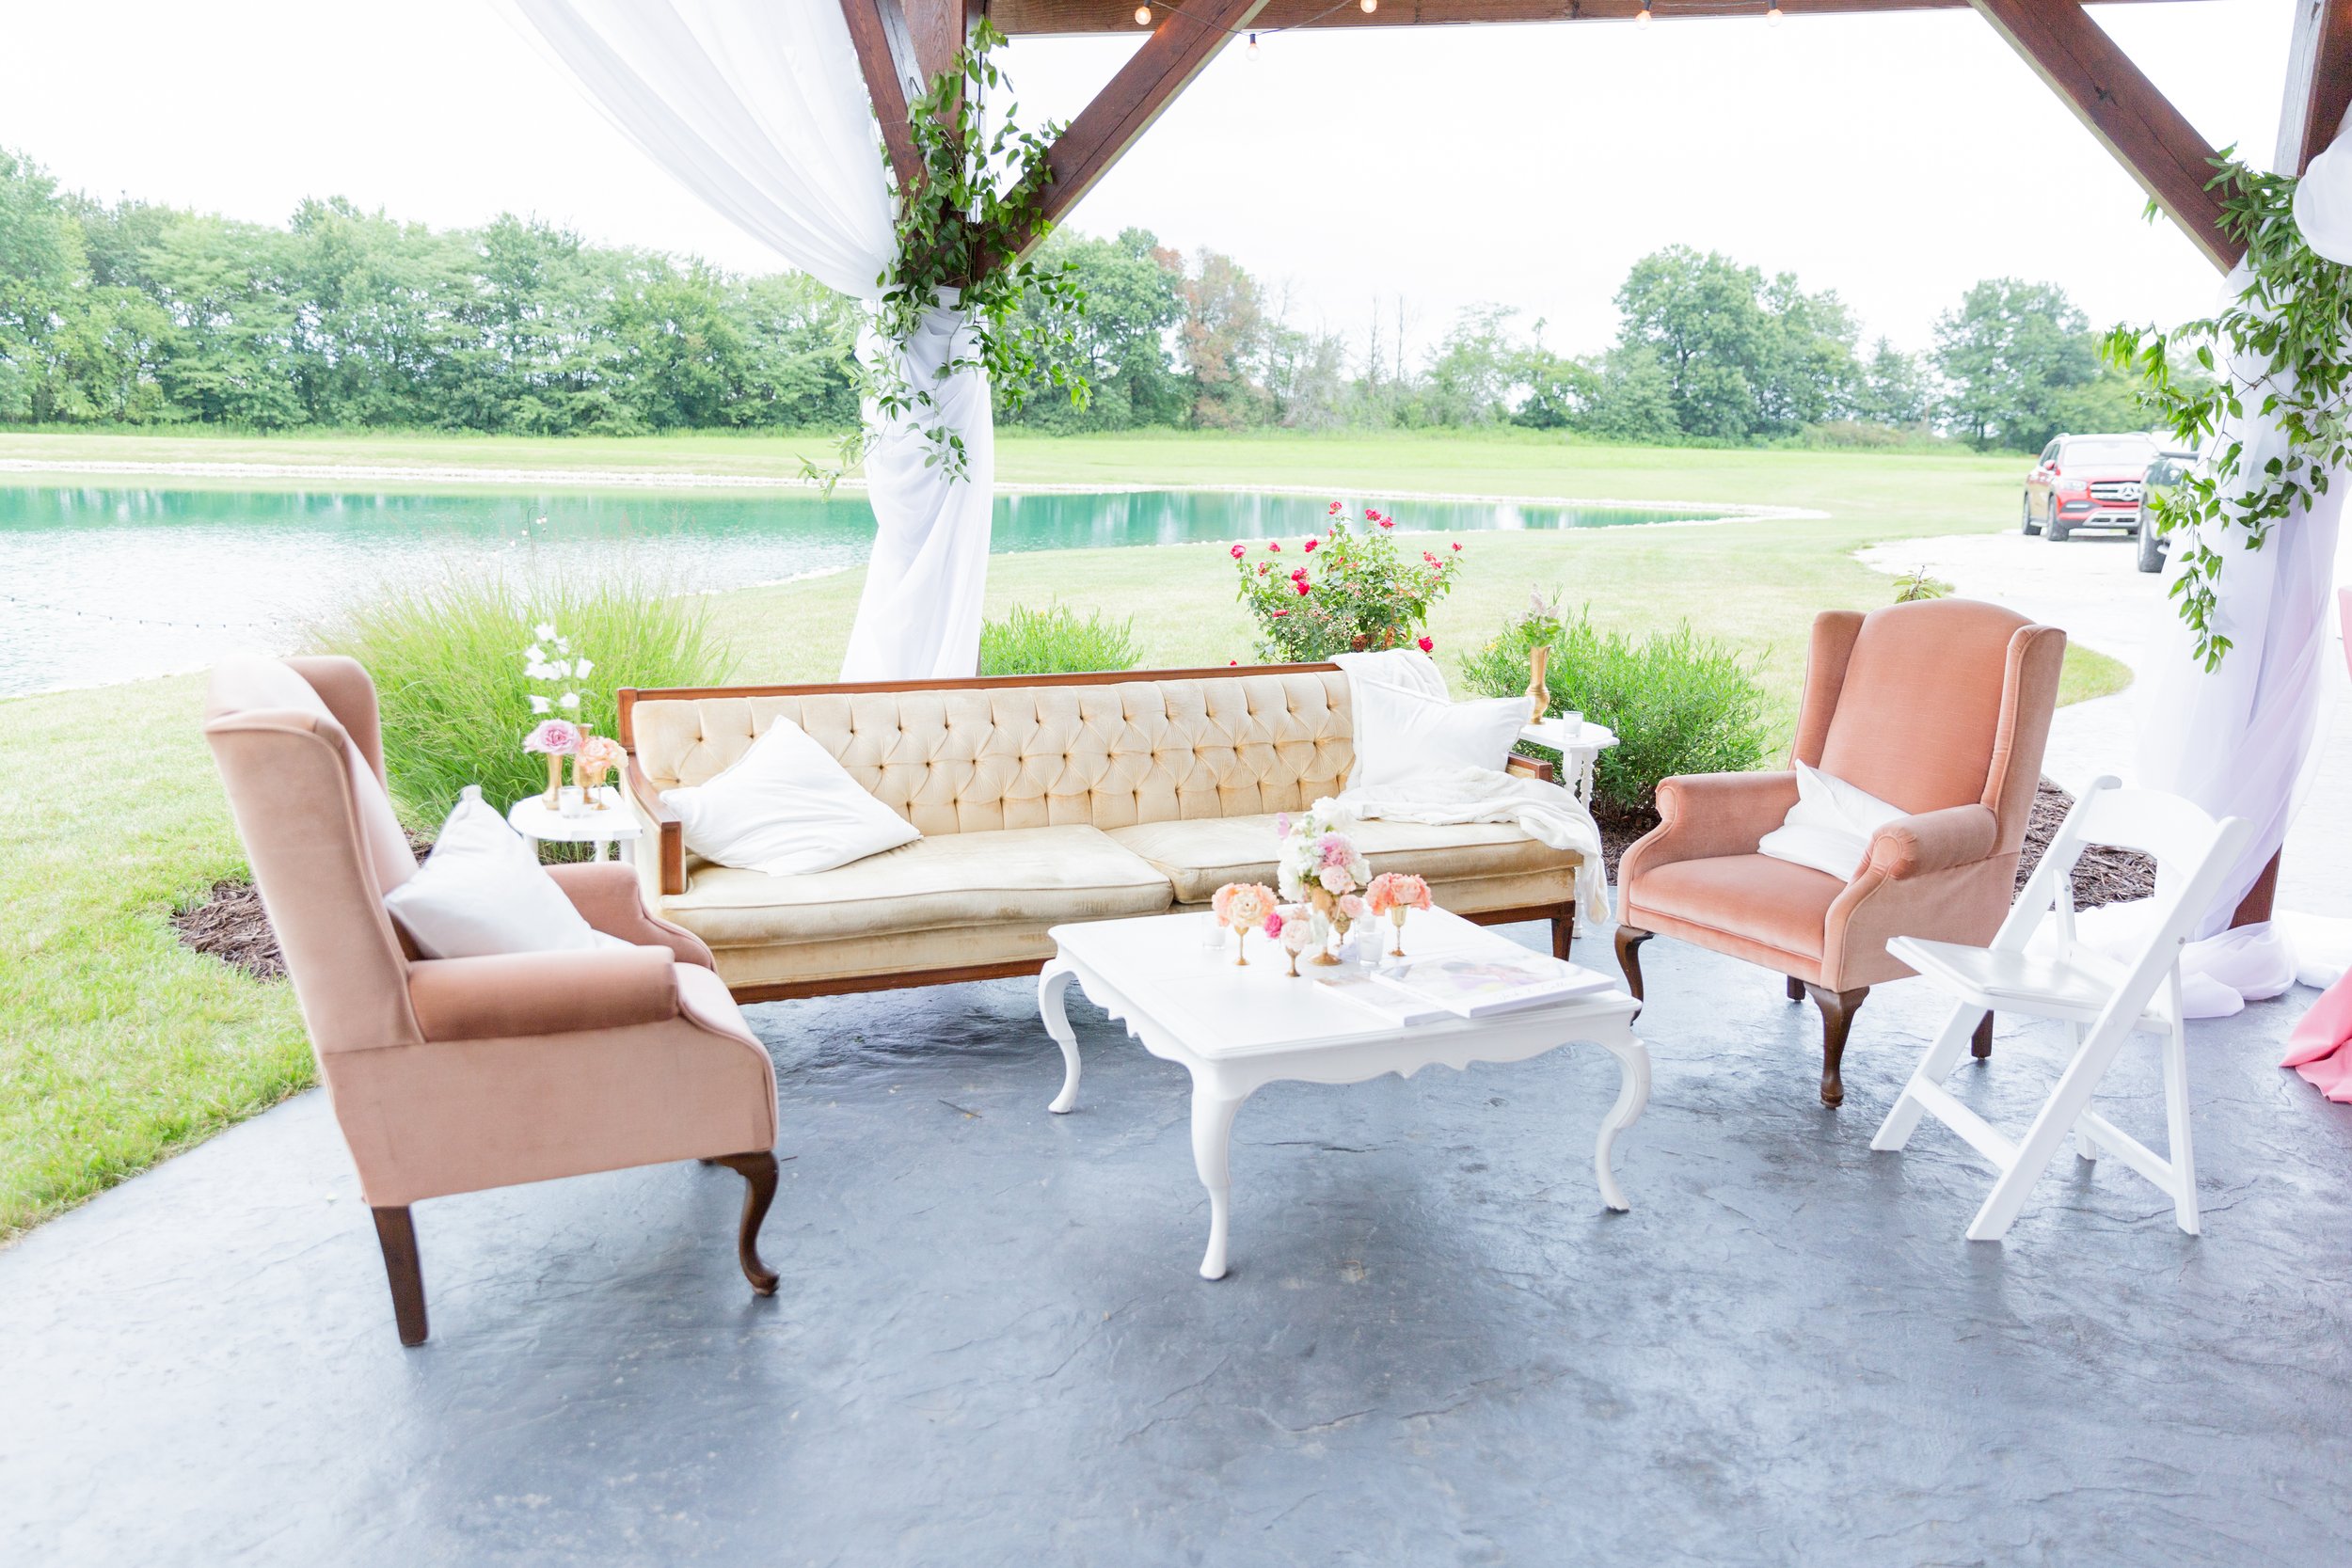 tipping-wedding vendors-wedding-lounge-rentals-couch-emerson-fields.jpg